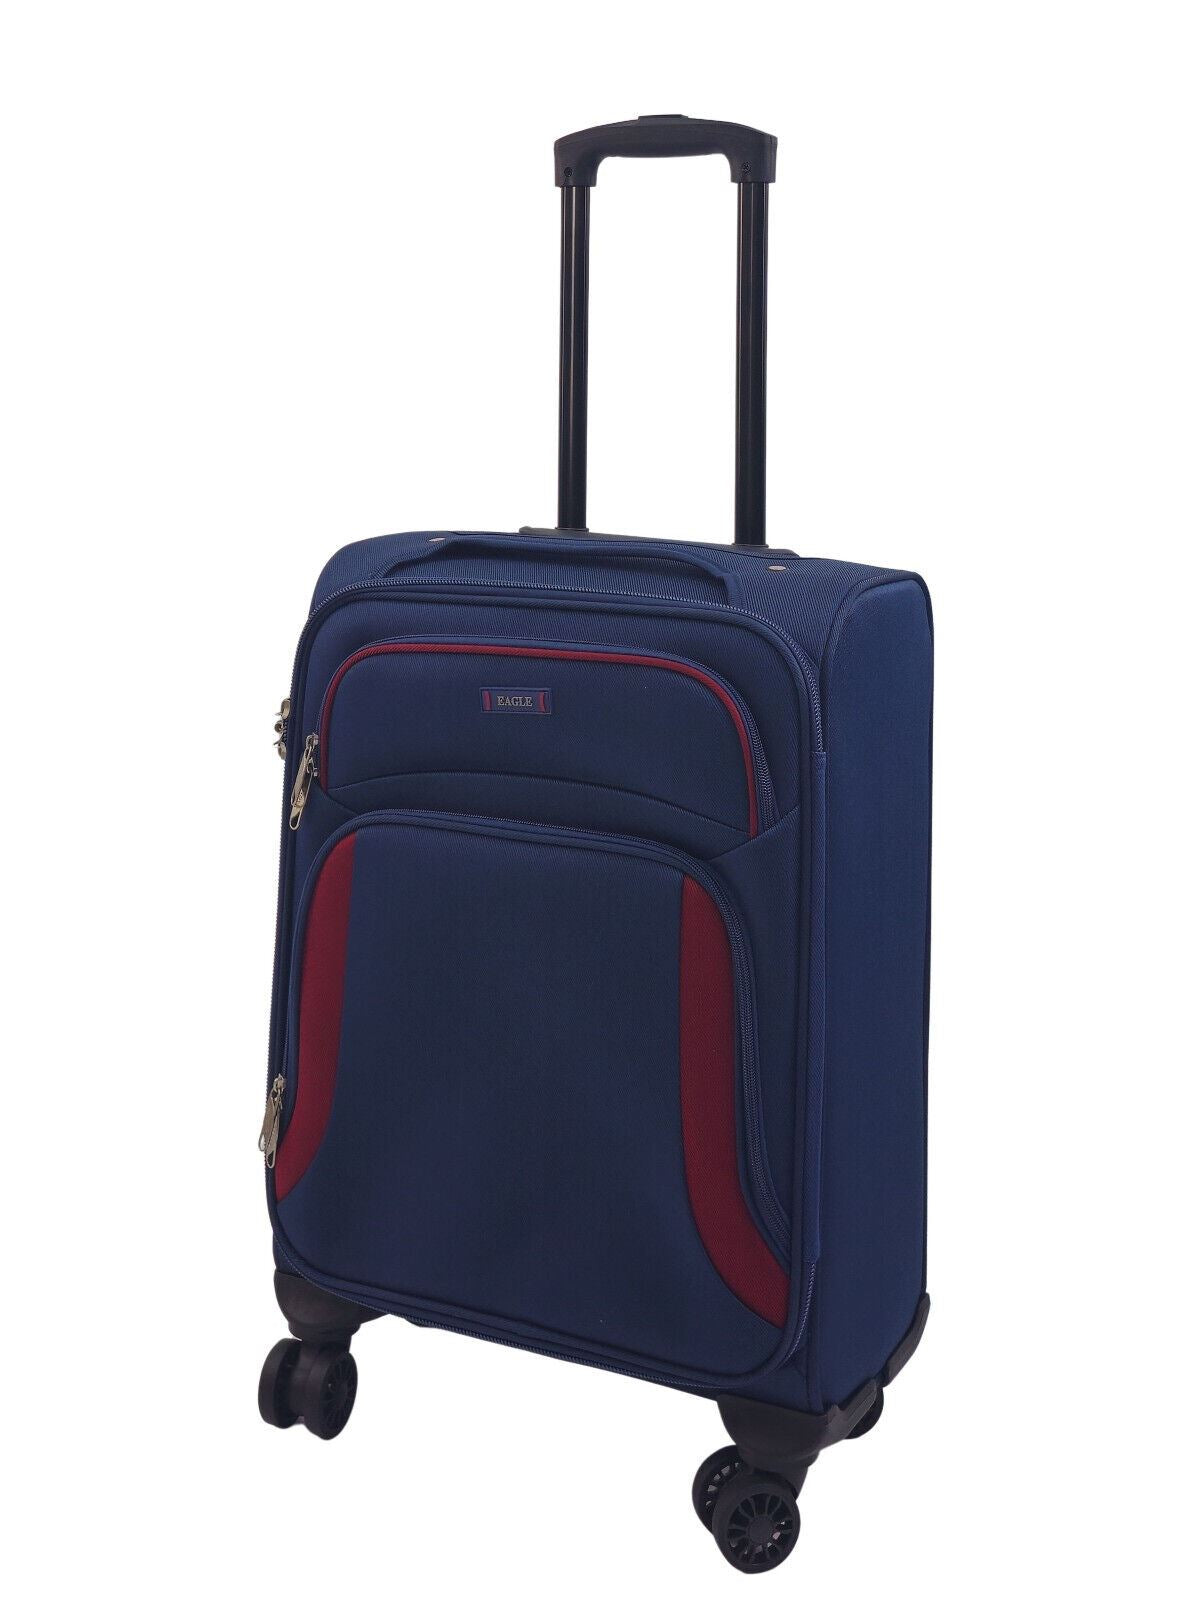 Soft Shell Cabin Suitcase 55 x 40 x 20 cm Lightweight Luggage Suitable for Easyjet, Ryanair